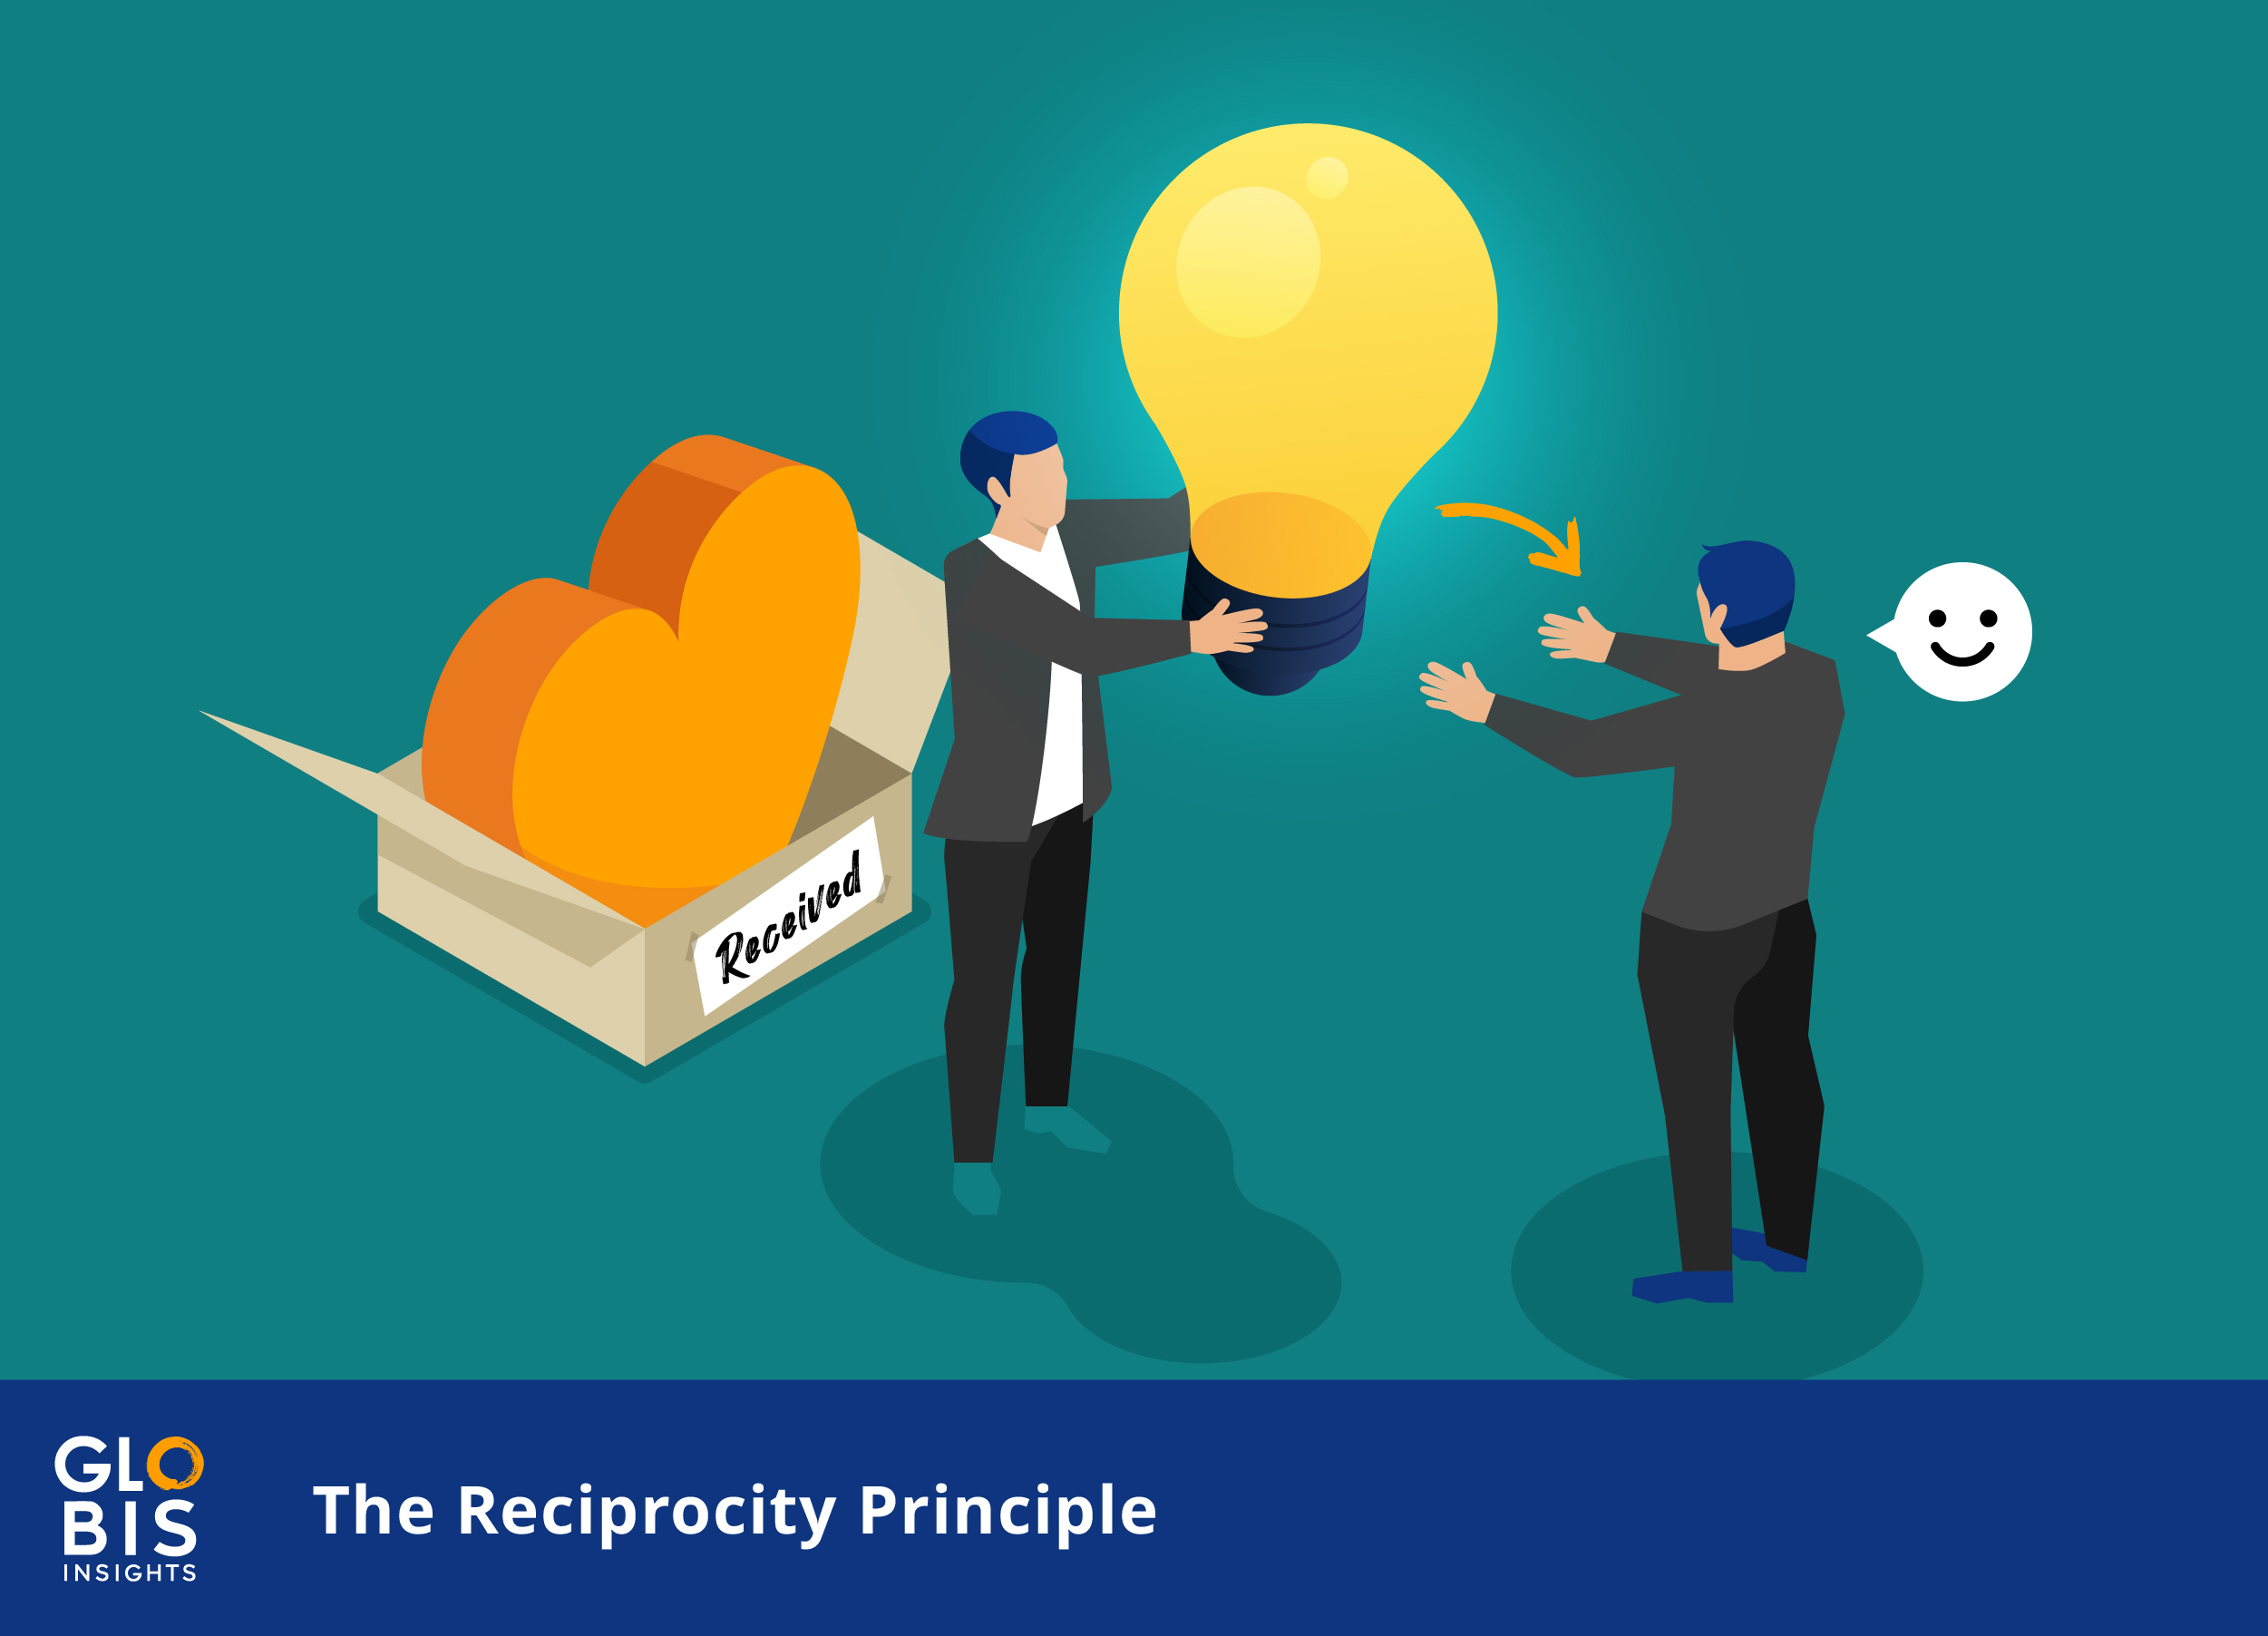 One man handing a lightbulb to another, representing the core philosophy of the reciprocity principle.